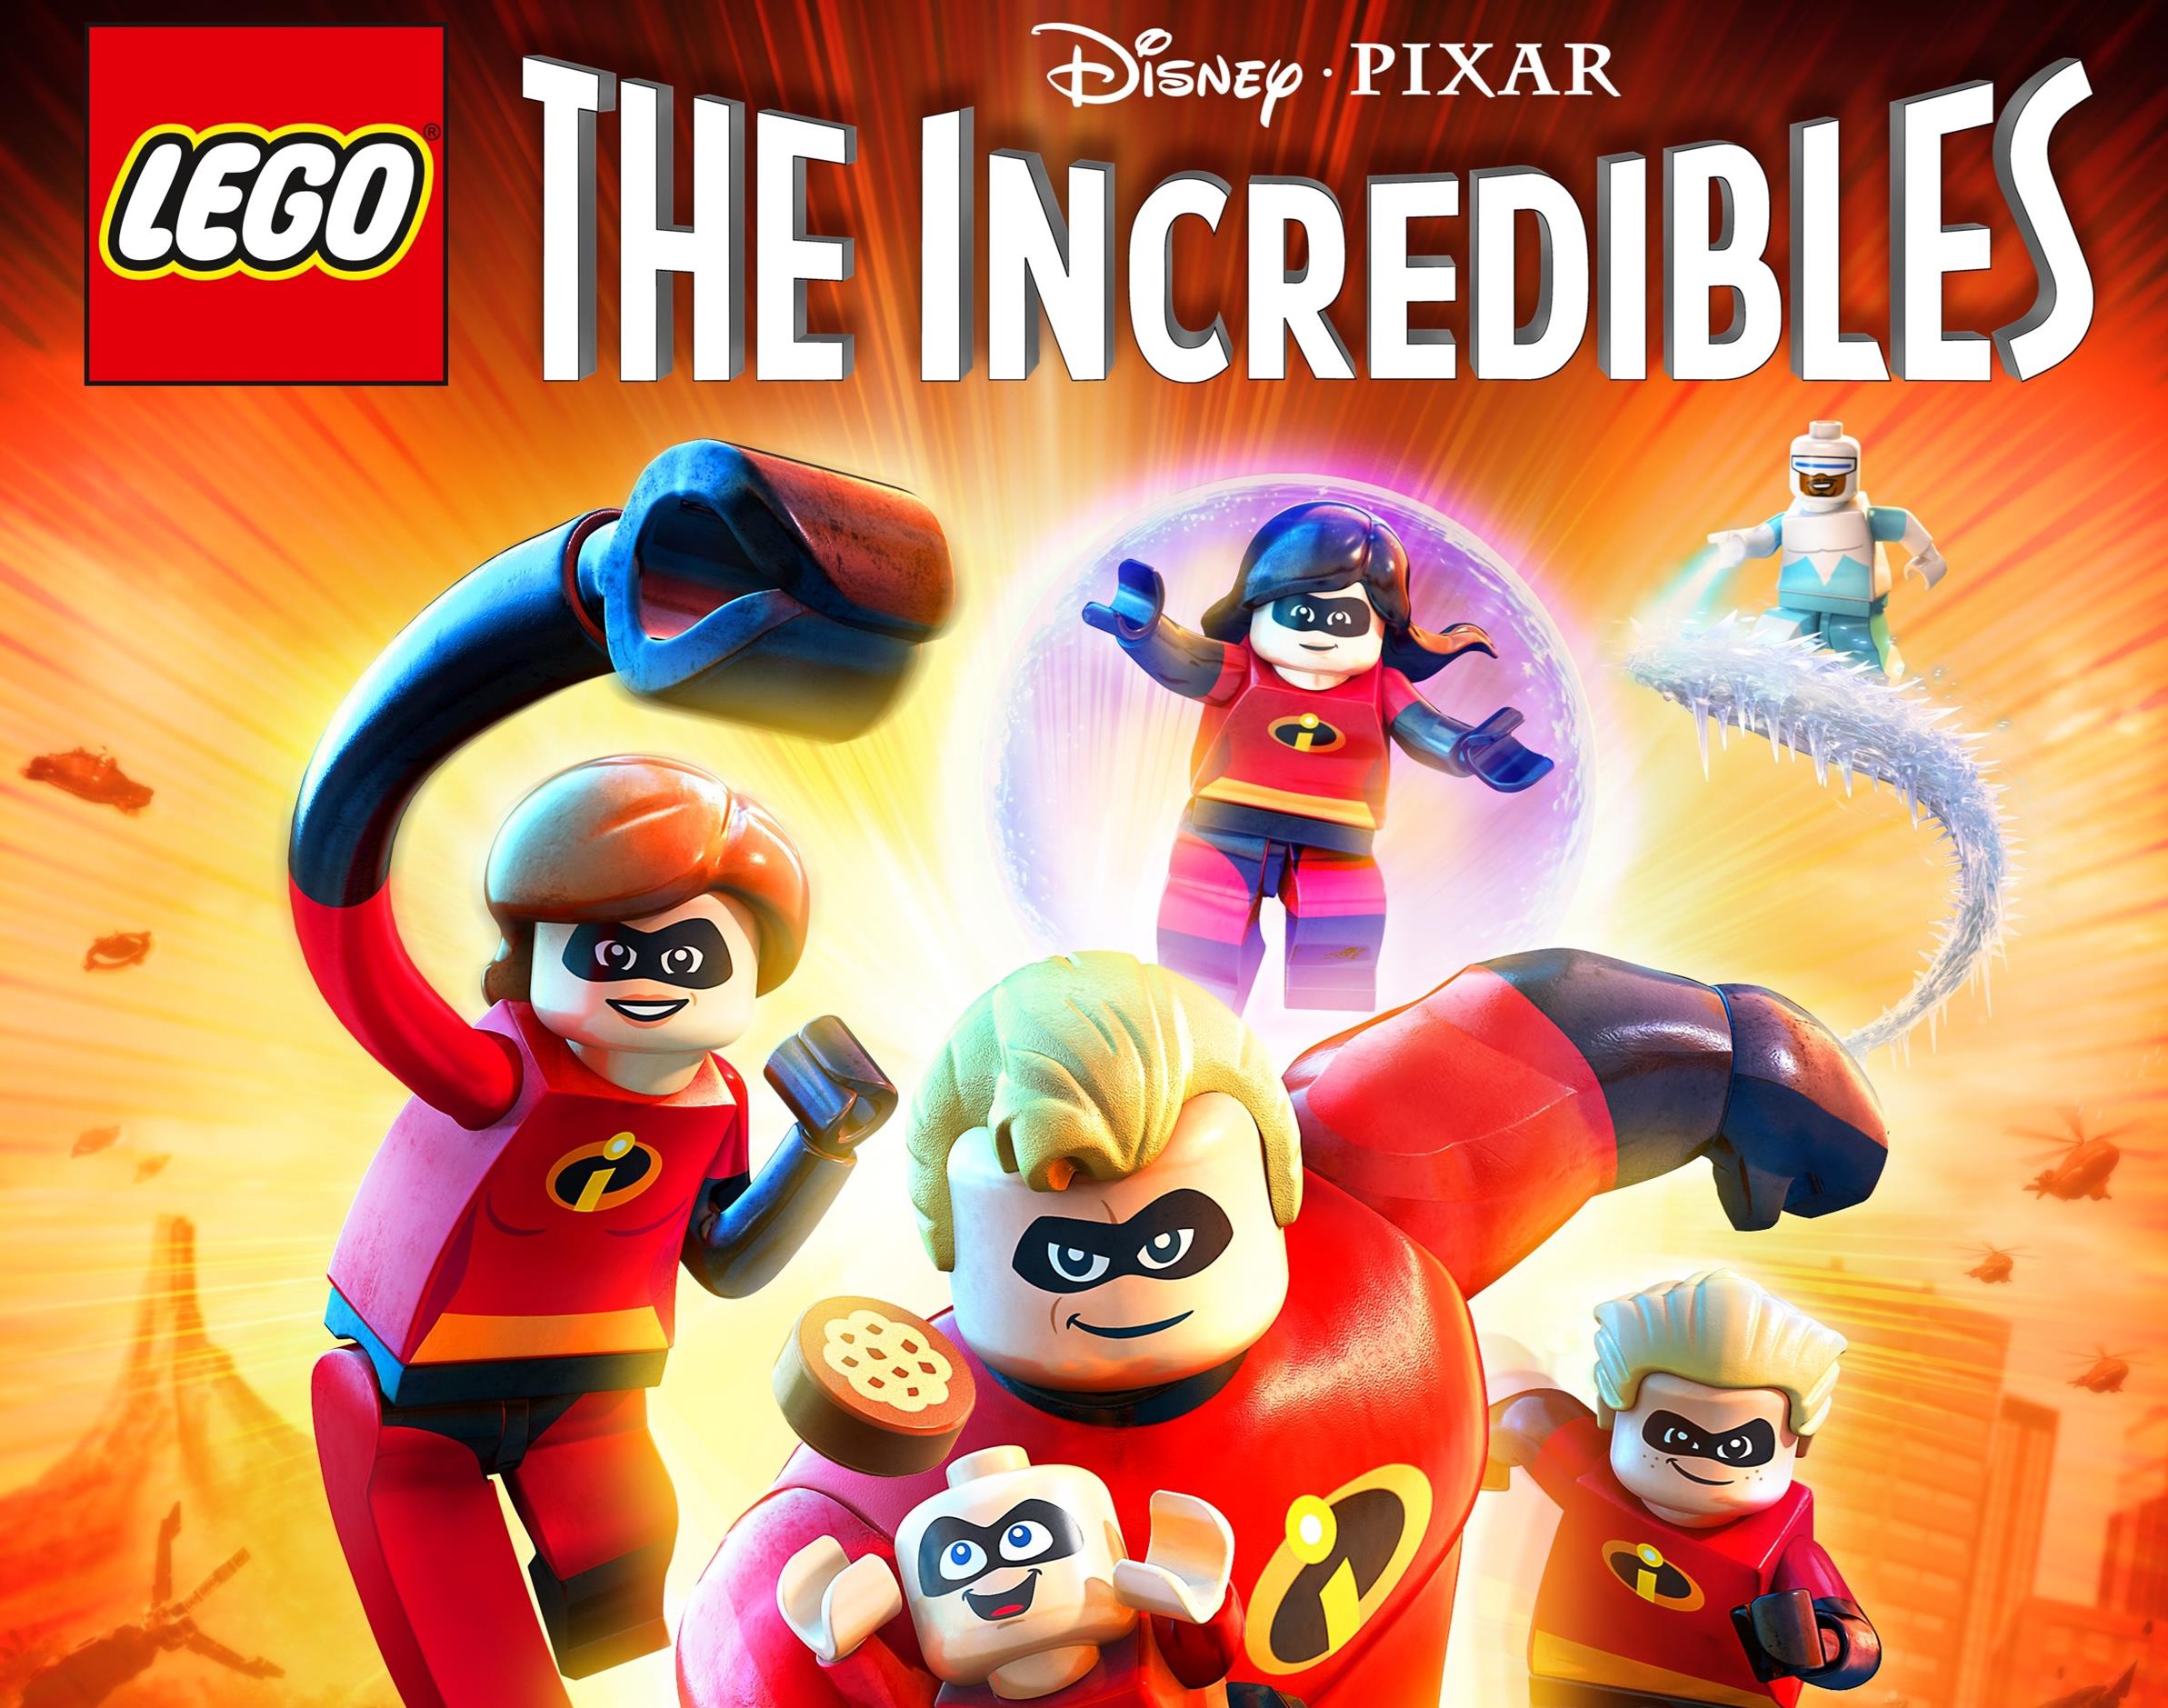 Image for Lego: The Incredibles officially announced, coming this June